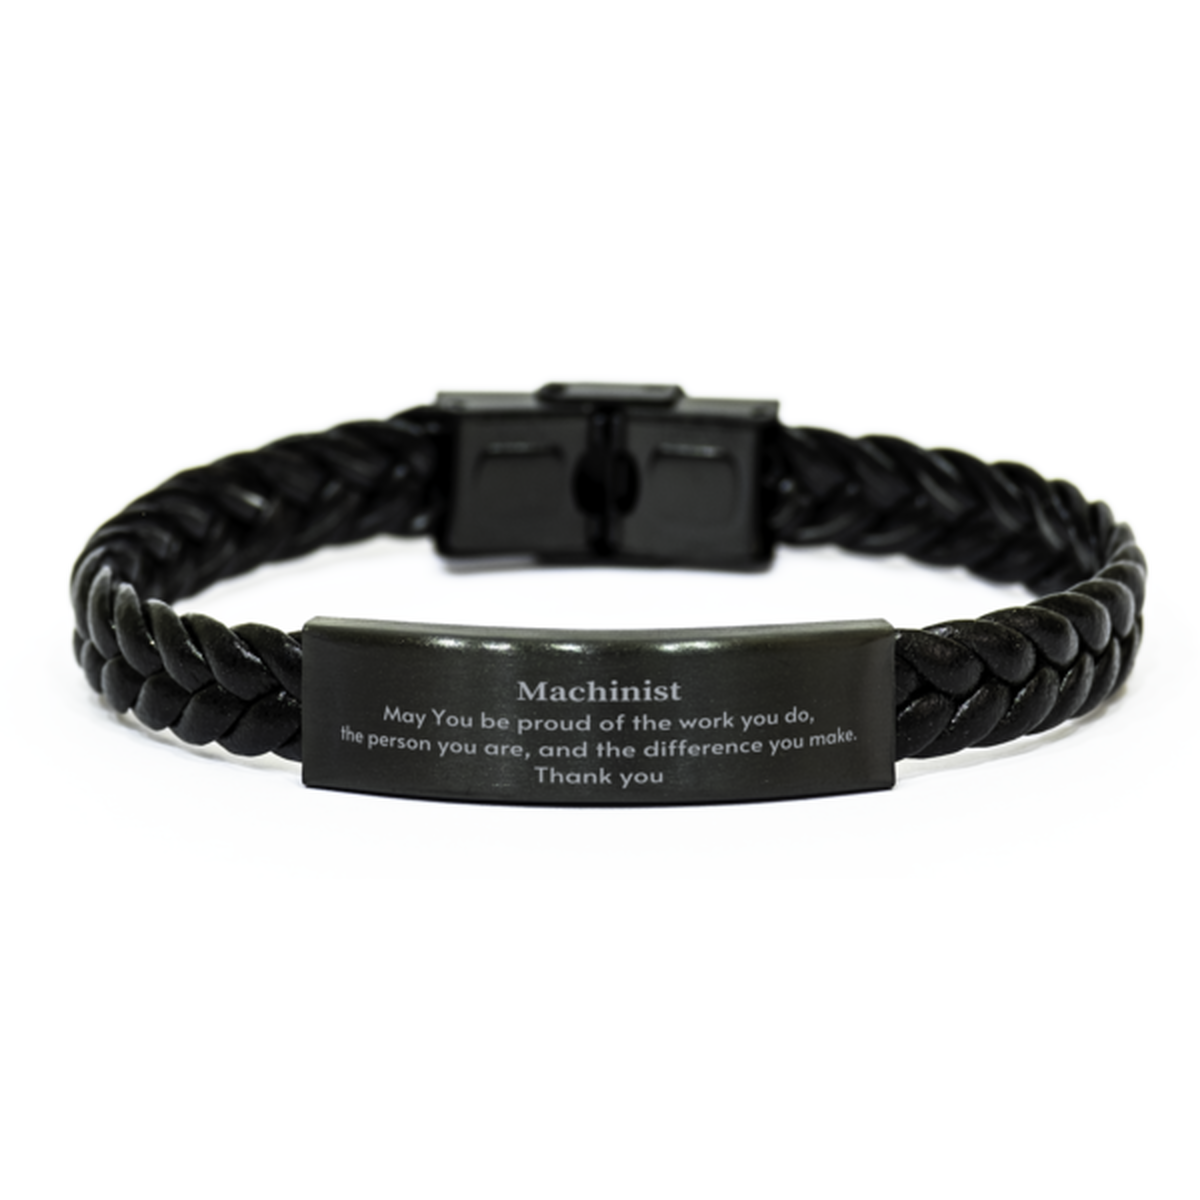 Heartwarming Braided Leather Bracelet Retirement Coworkers Gifts for Machinist, Machinist May You be proud of the work you do, the person you are Gifts for Boss Men Women Friends